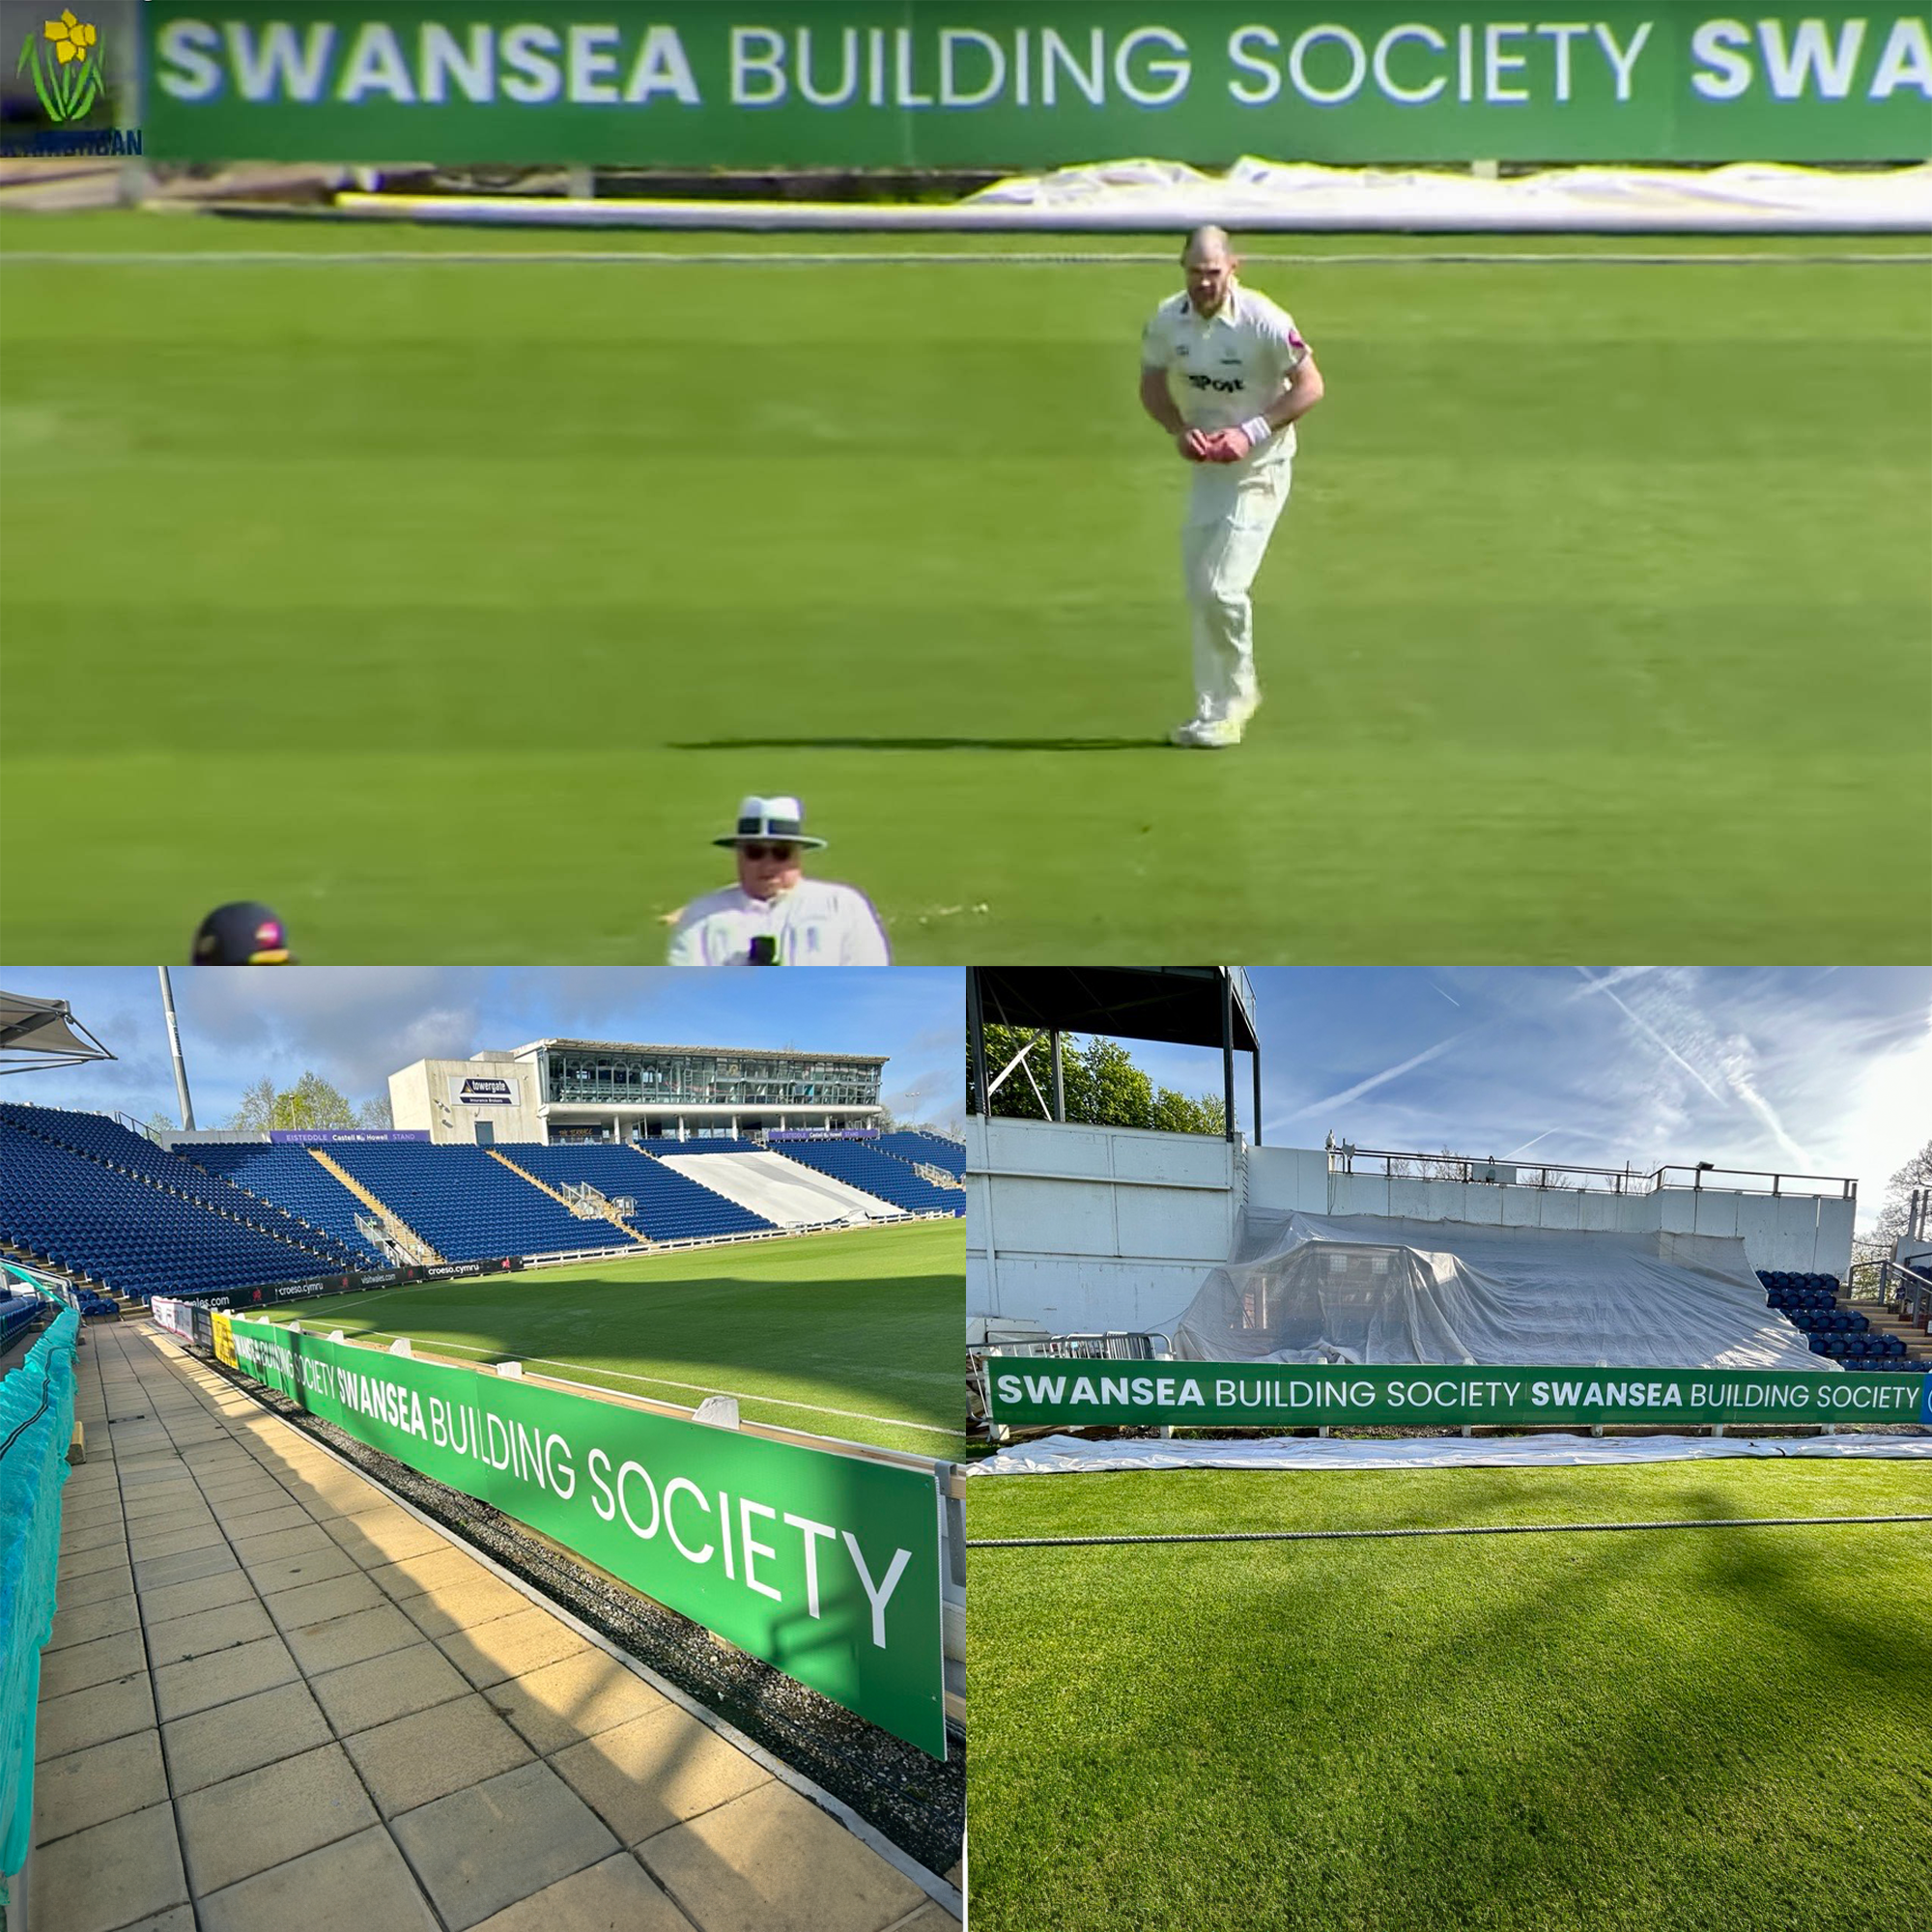 Swansea Building Society proudly supports Glamorgan Cricket Club